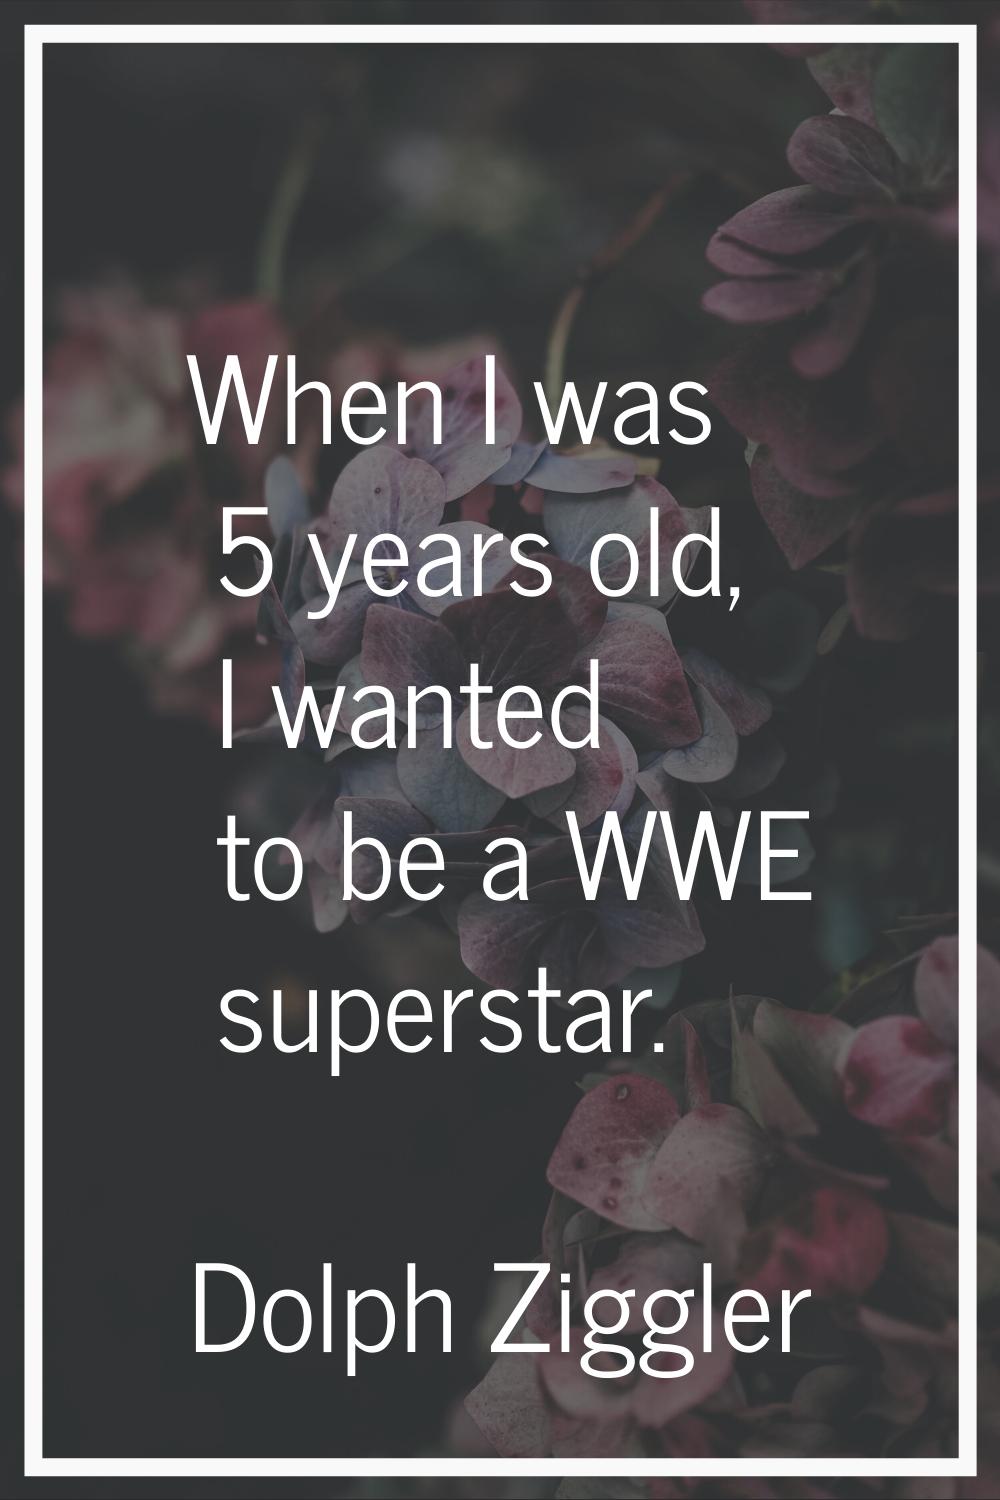 When I was 5 years old, I wanted to be a WWE superstar.